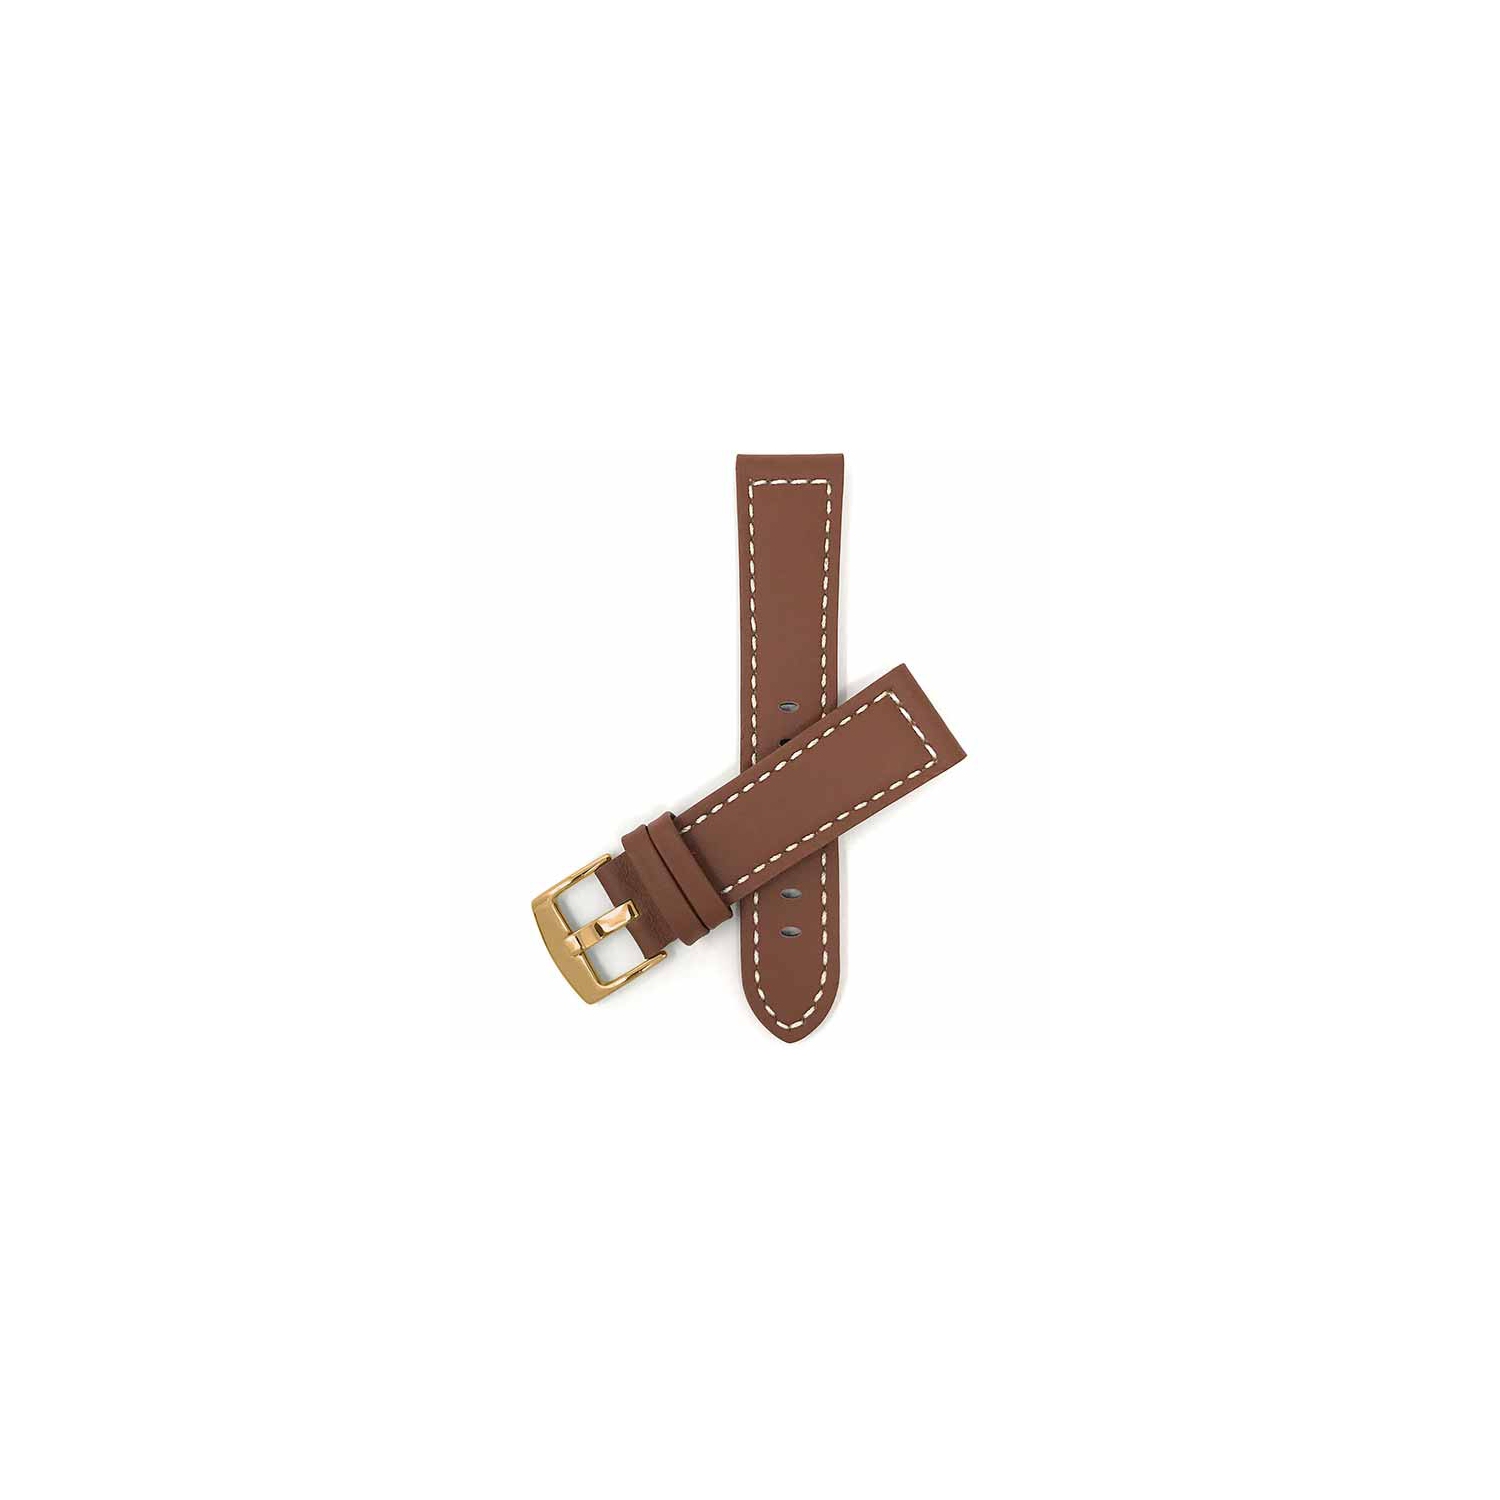 Bandini Thick Leather Racer Smartwatch Strap, White Stitch For Michael Kors Bradshaw - 22mm, Tan / Gold Buckle